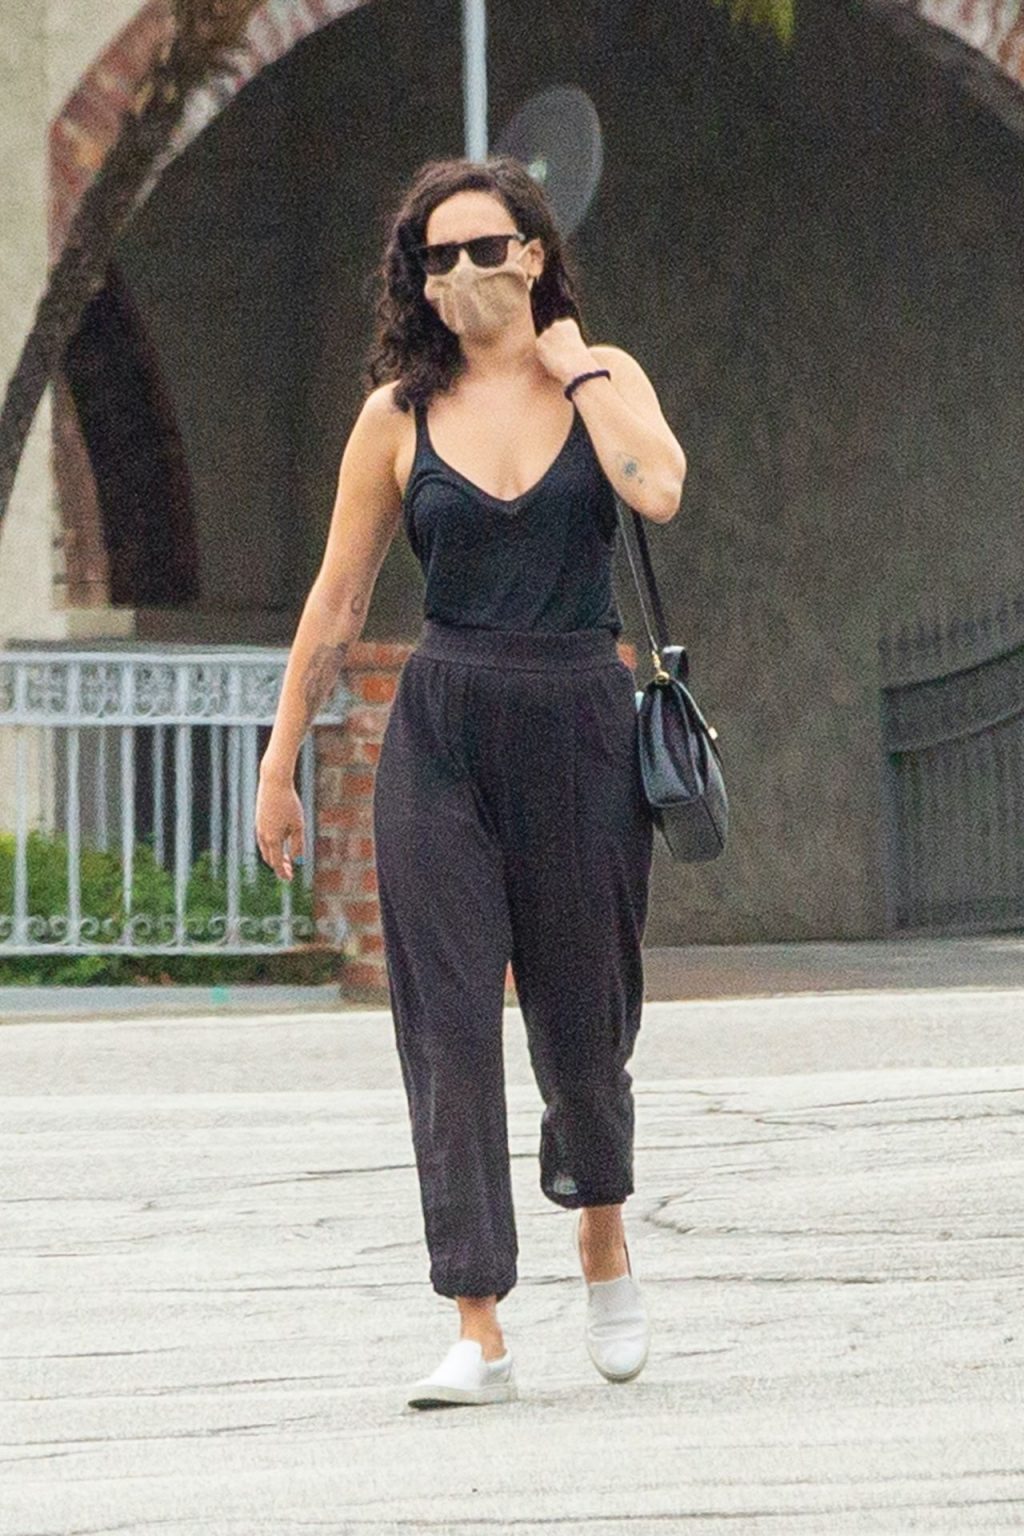 Rumer Willis Visits a Healing Medical Center in Brentwood (22 Photos)